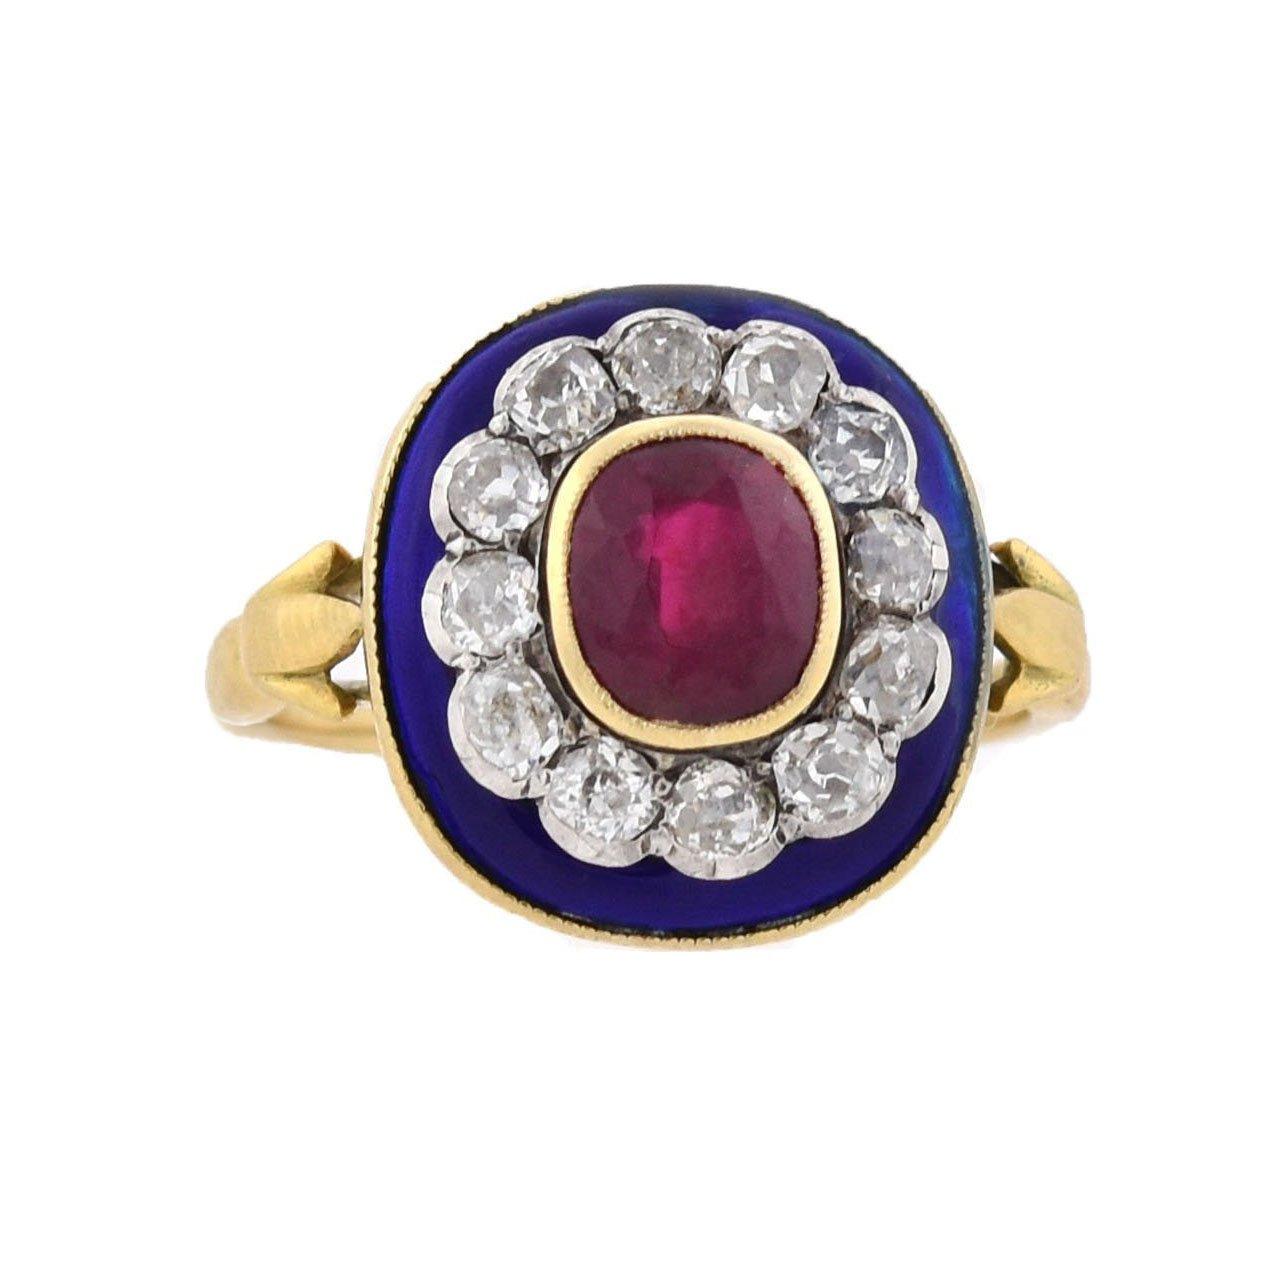 An exquisite and unique ruby and diamond ring from the Victorian (ca1880) era! French in origin, this gorgeous piece is crafted in vibrant 18kt yellow gold and features sterling silver accents. The raised, oval-shaped centerpiece displays a natural,